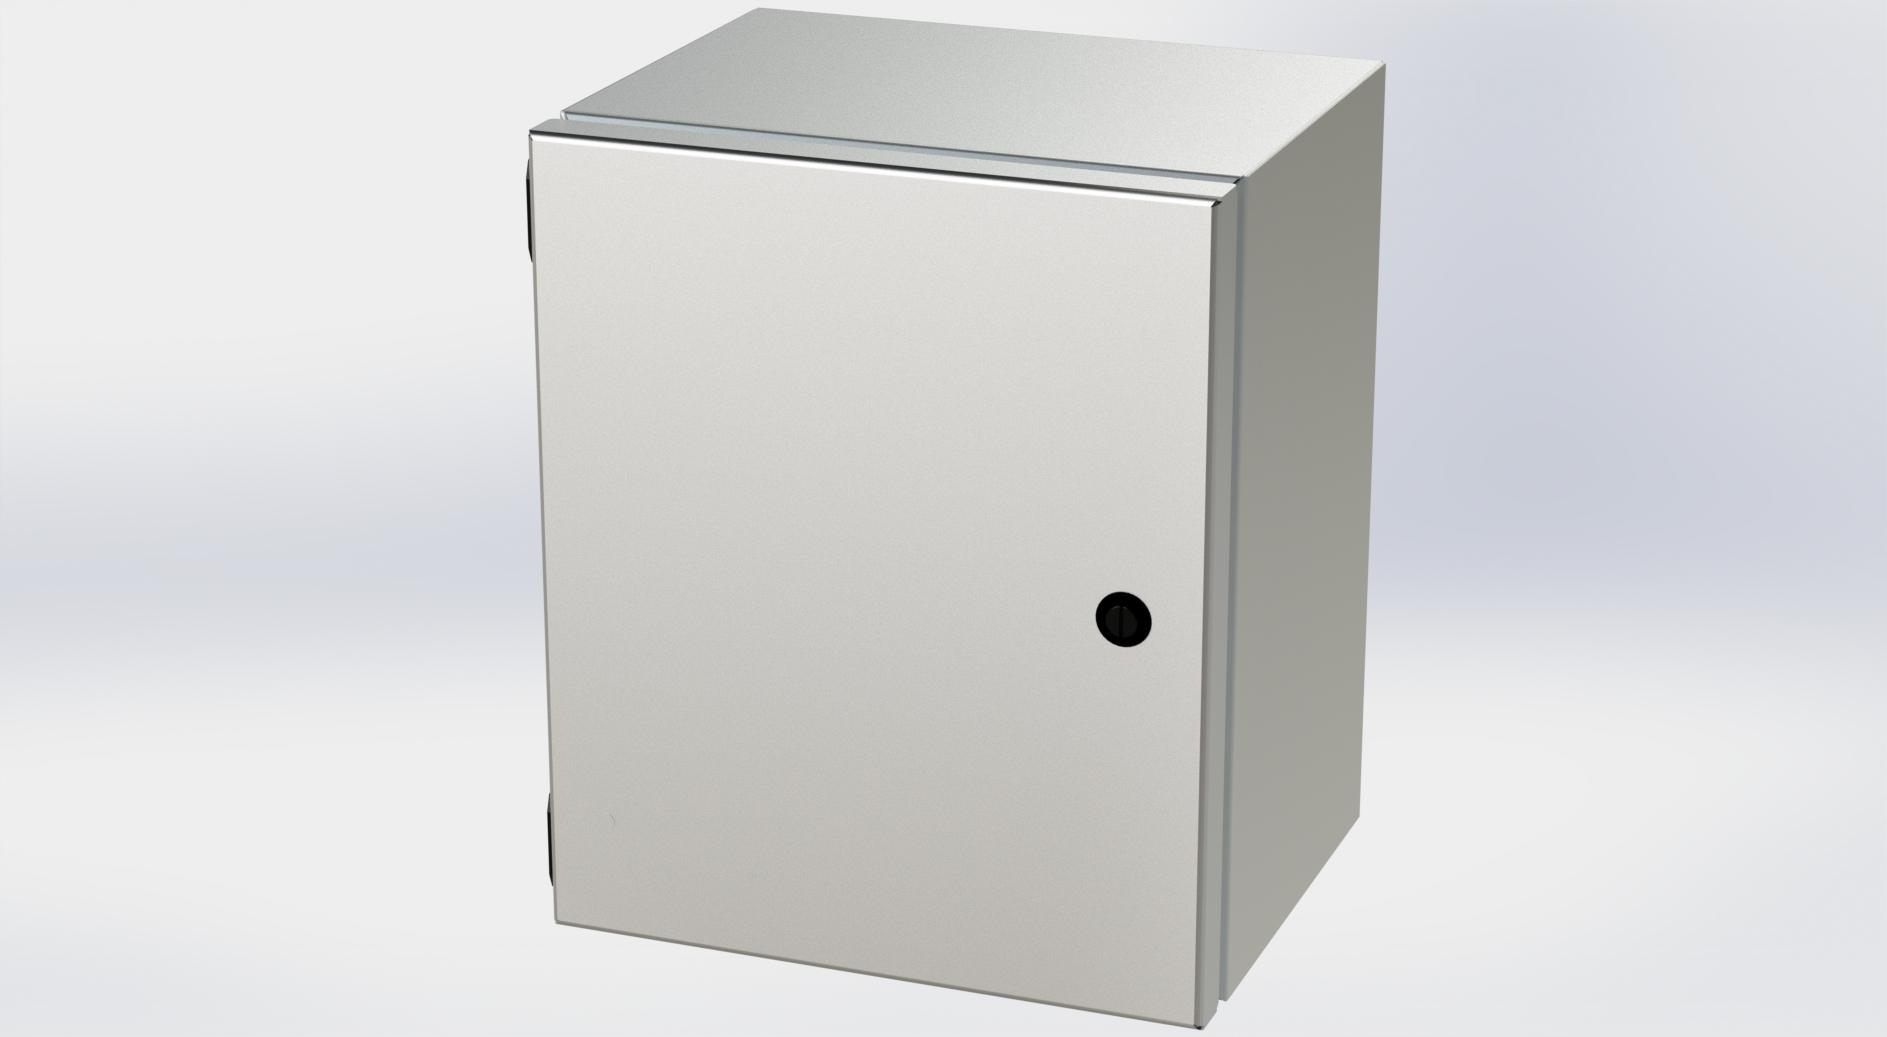 Saginaw Control SCE-12108ELJSS6 S.S. ELJ Enclosure, Height:12.00", Width:10.00", Depth:8.00", #4 brushed finish on all exterior surfaces. Optional sub-panels are powder coated white.